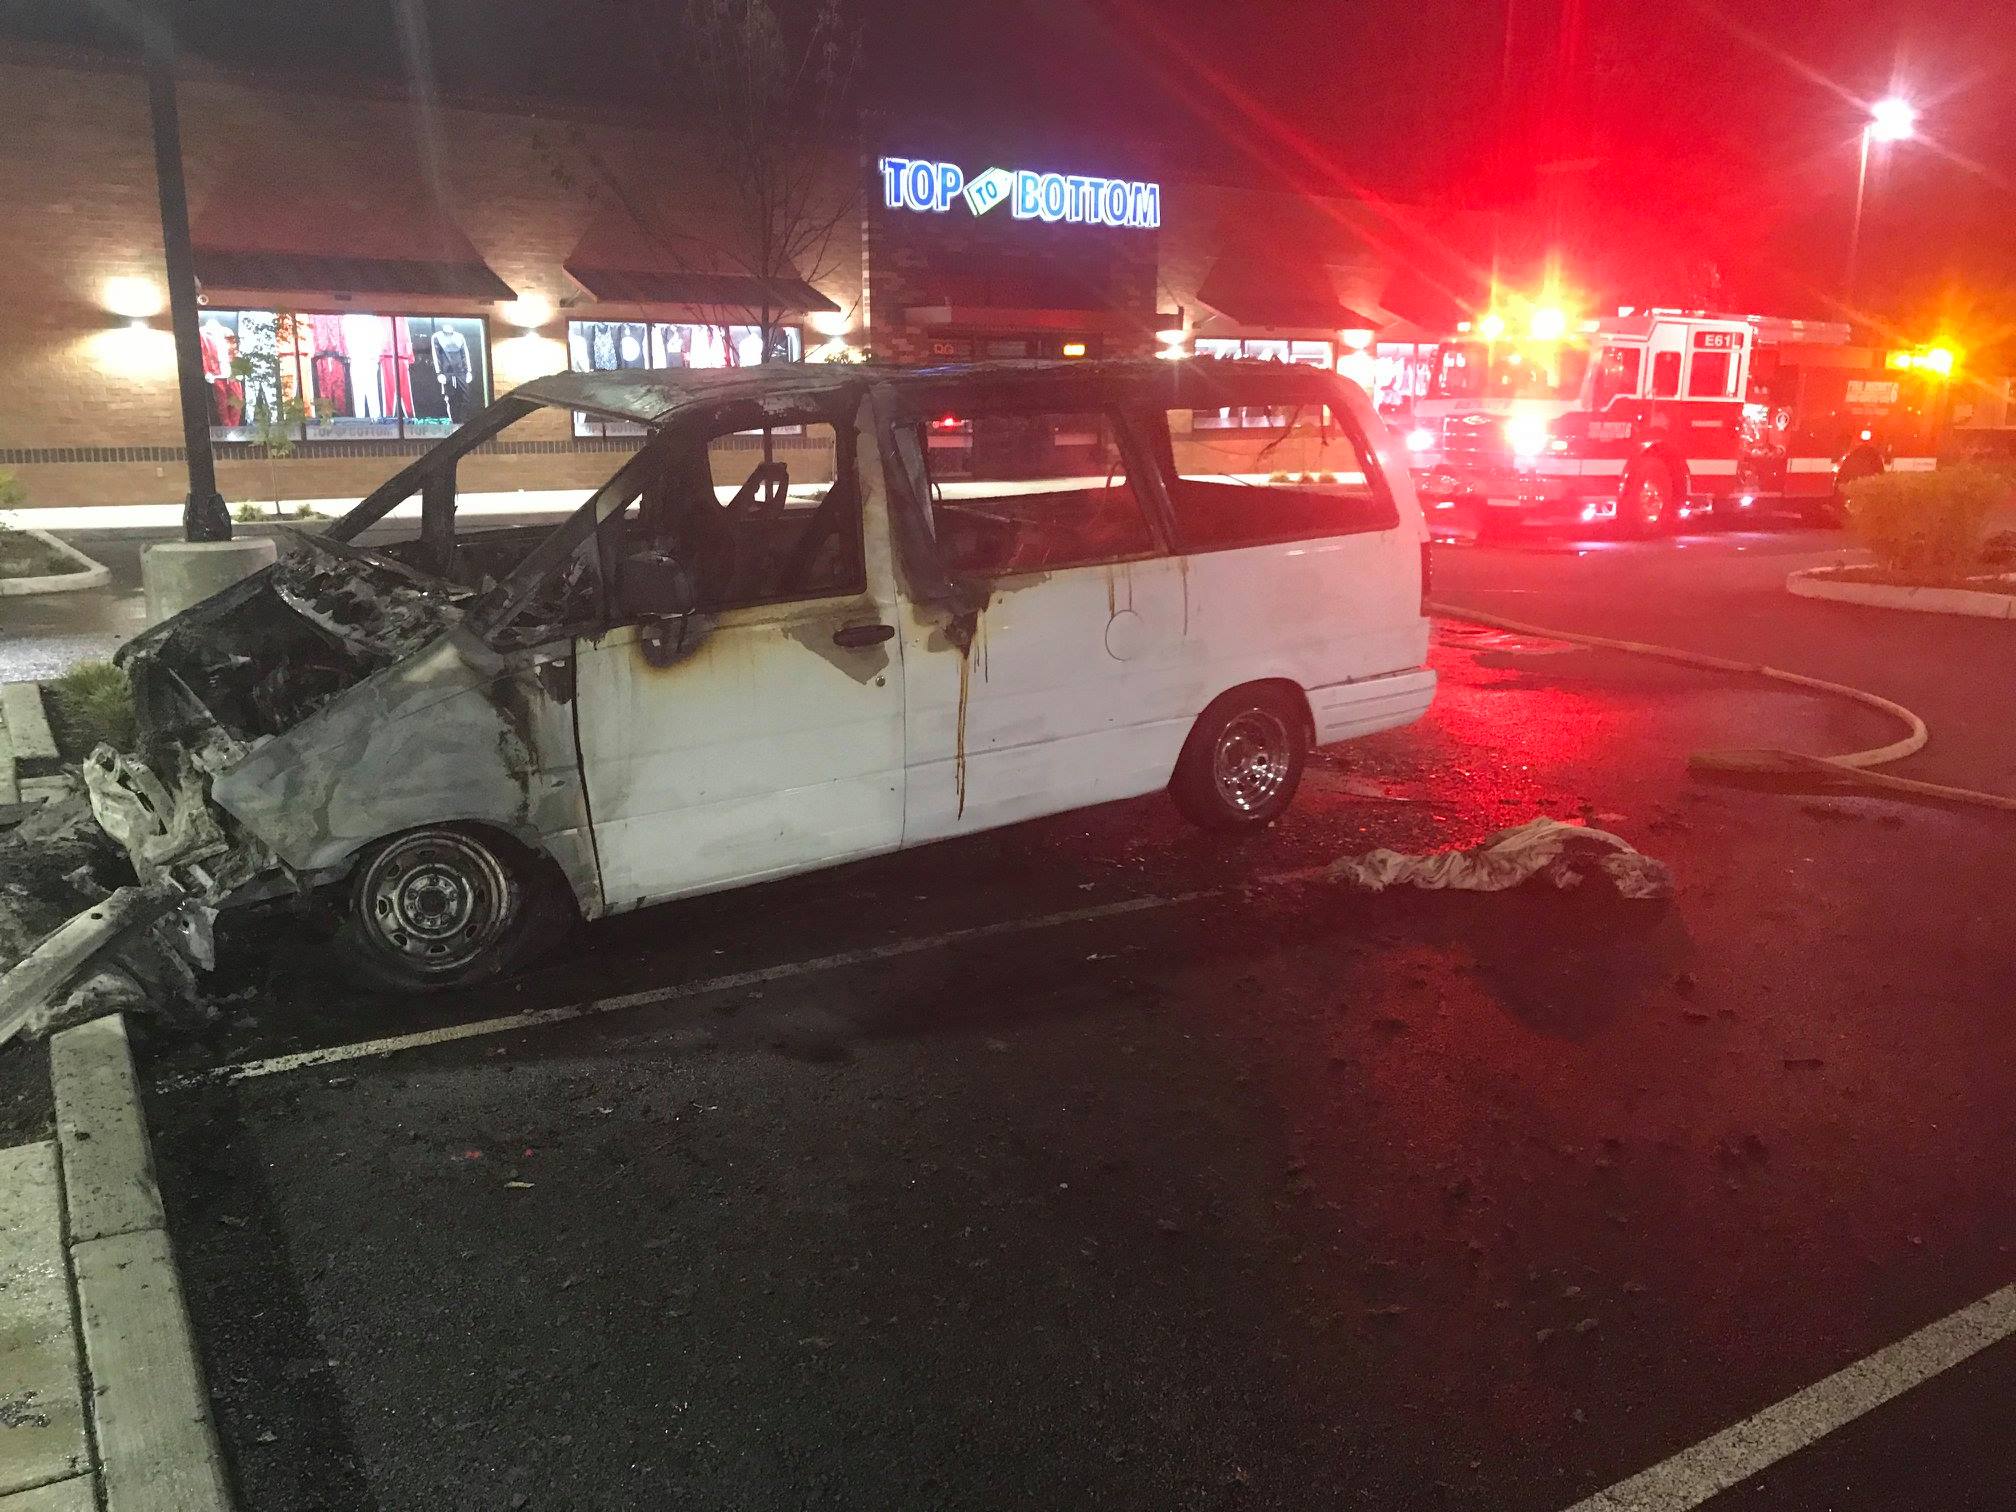 Clark County Fire District 6 firefighters quickly extinguished a vehicle fire overnight Wednesday. The fire destroyed a Ford Aerostar parked in the lot of a stripmall off Highway 99.